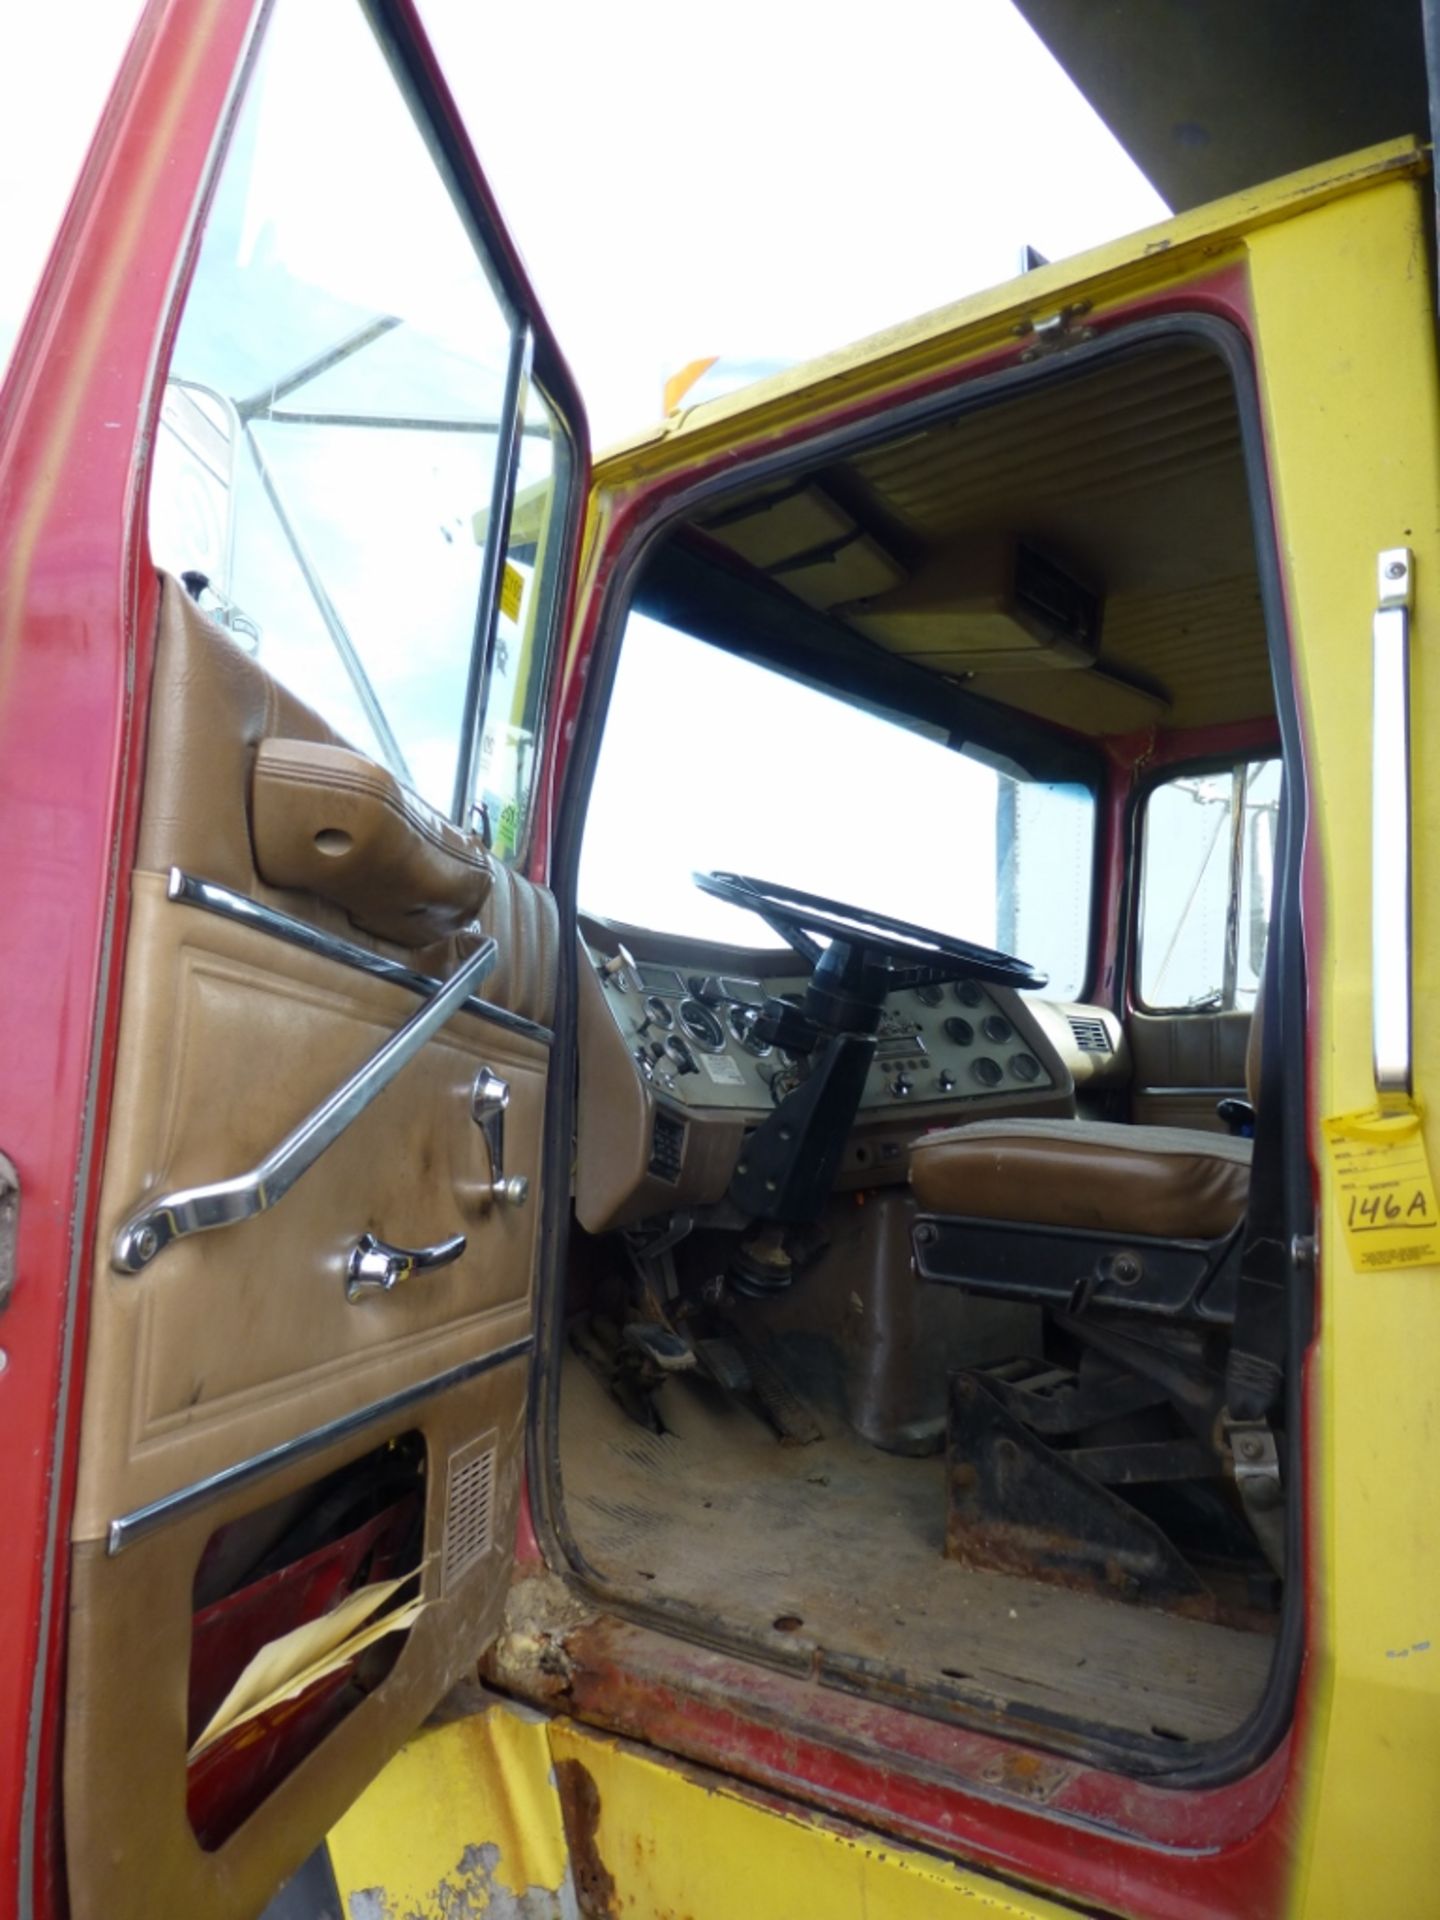 1992 Ford L9000 dump truck - Image 5 of 28